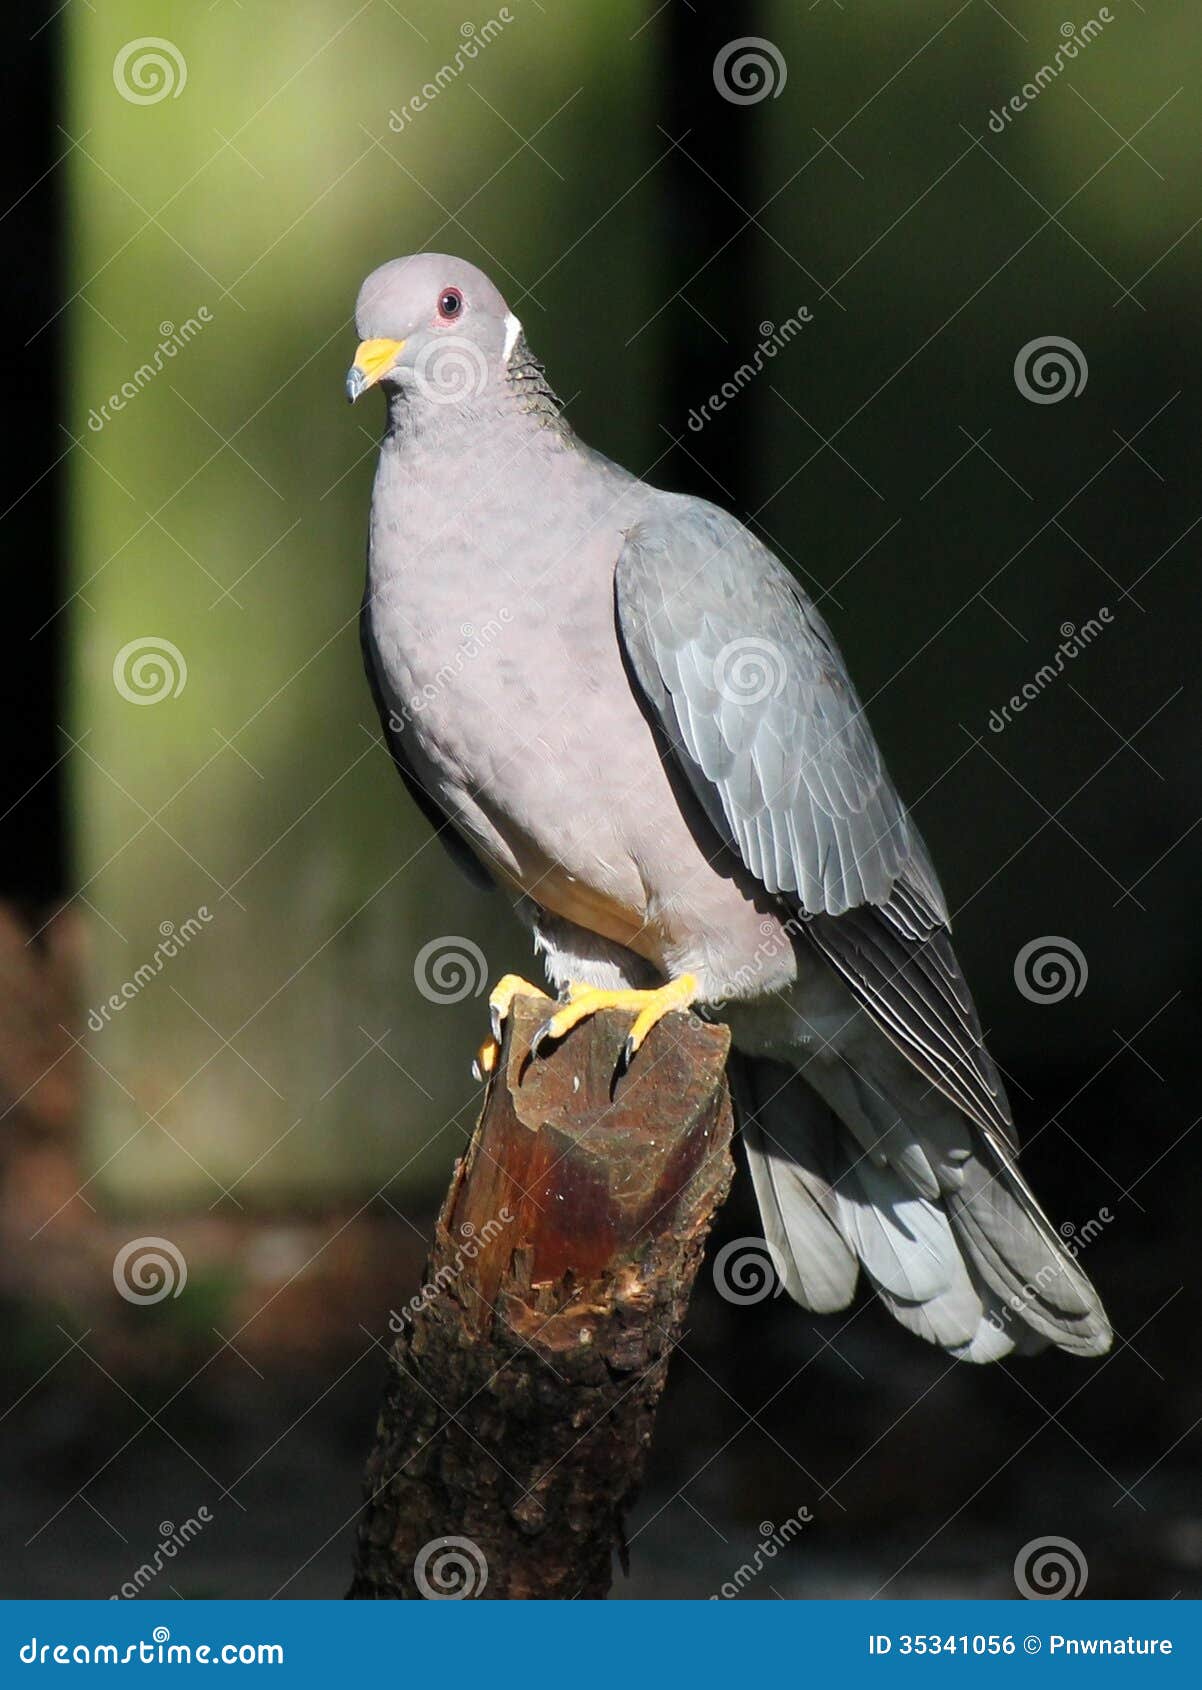 Cyclops: Band-Tailed Pigeon – West Sound Wildlife Shelter